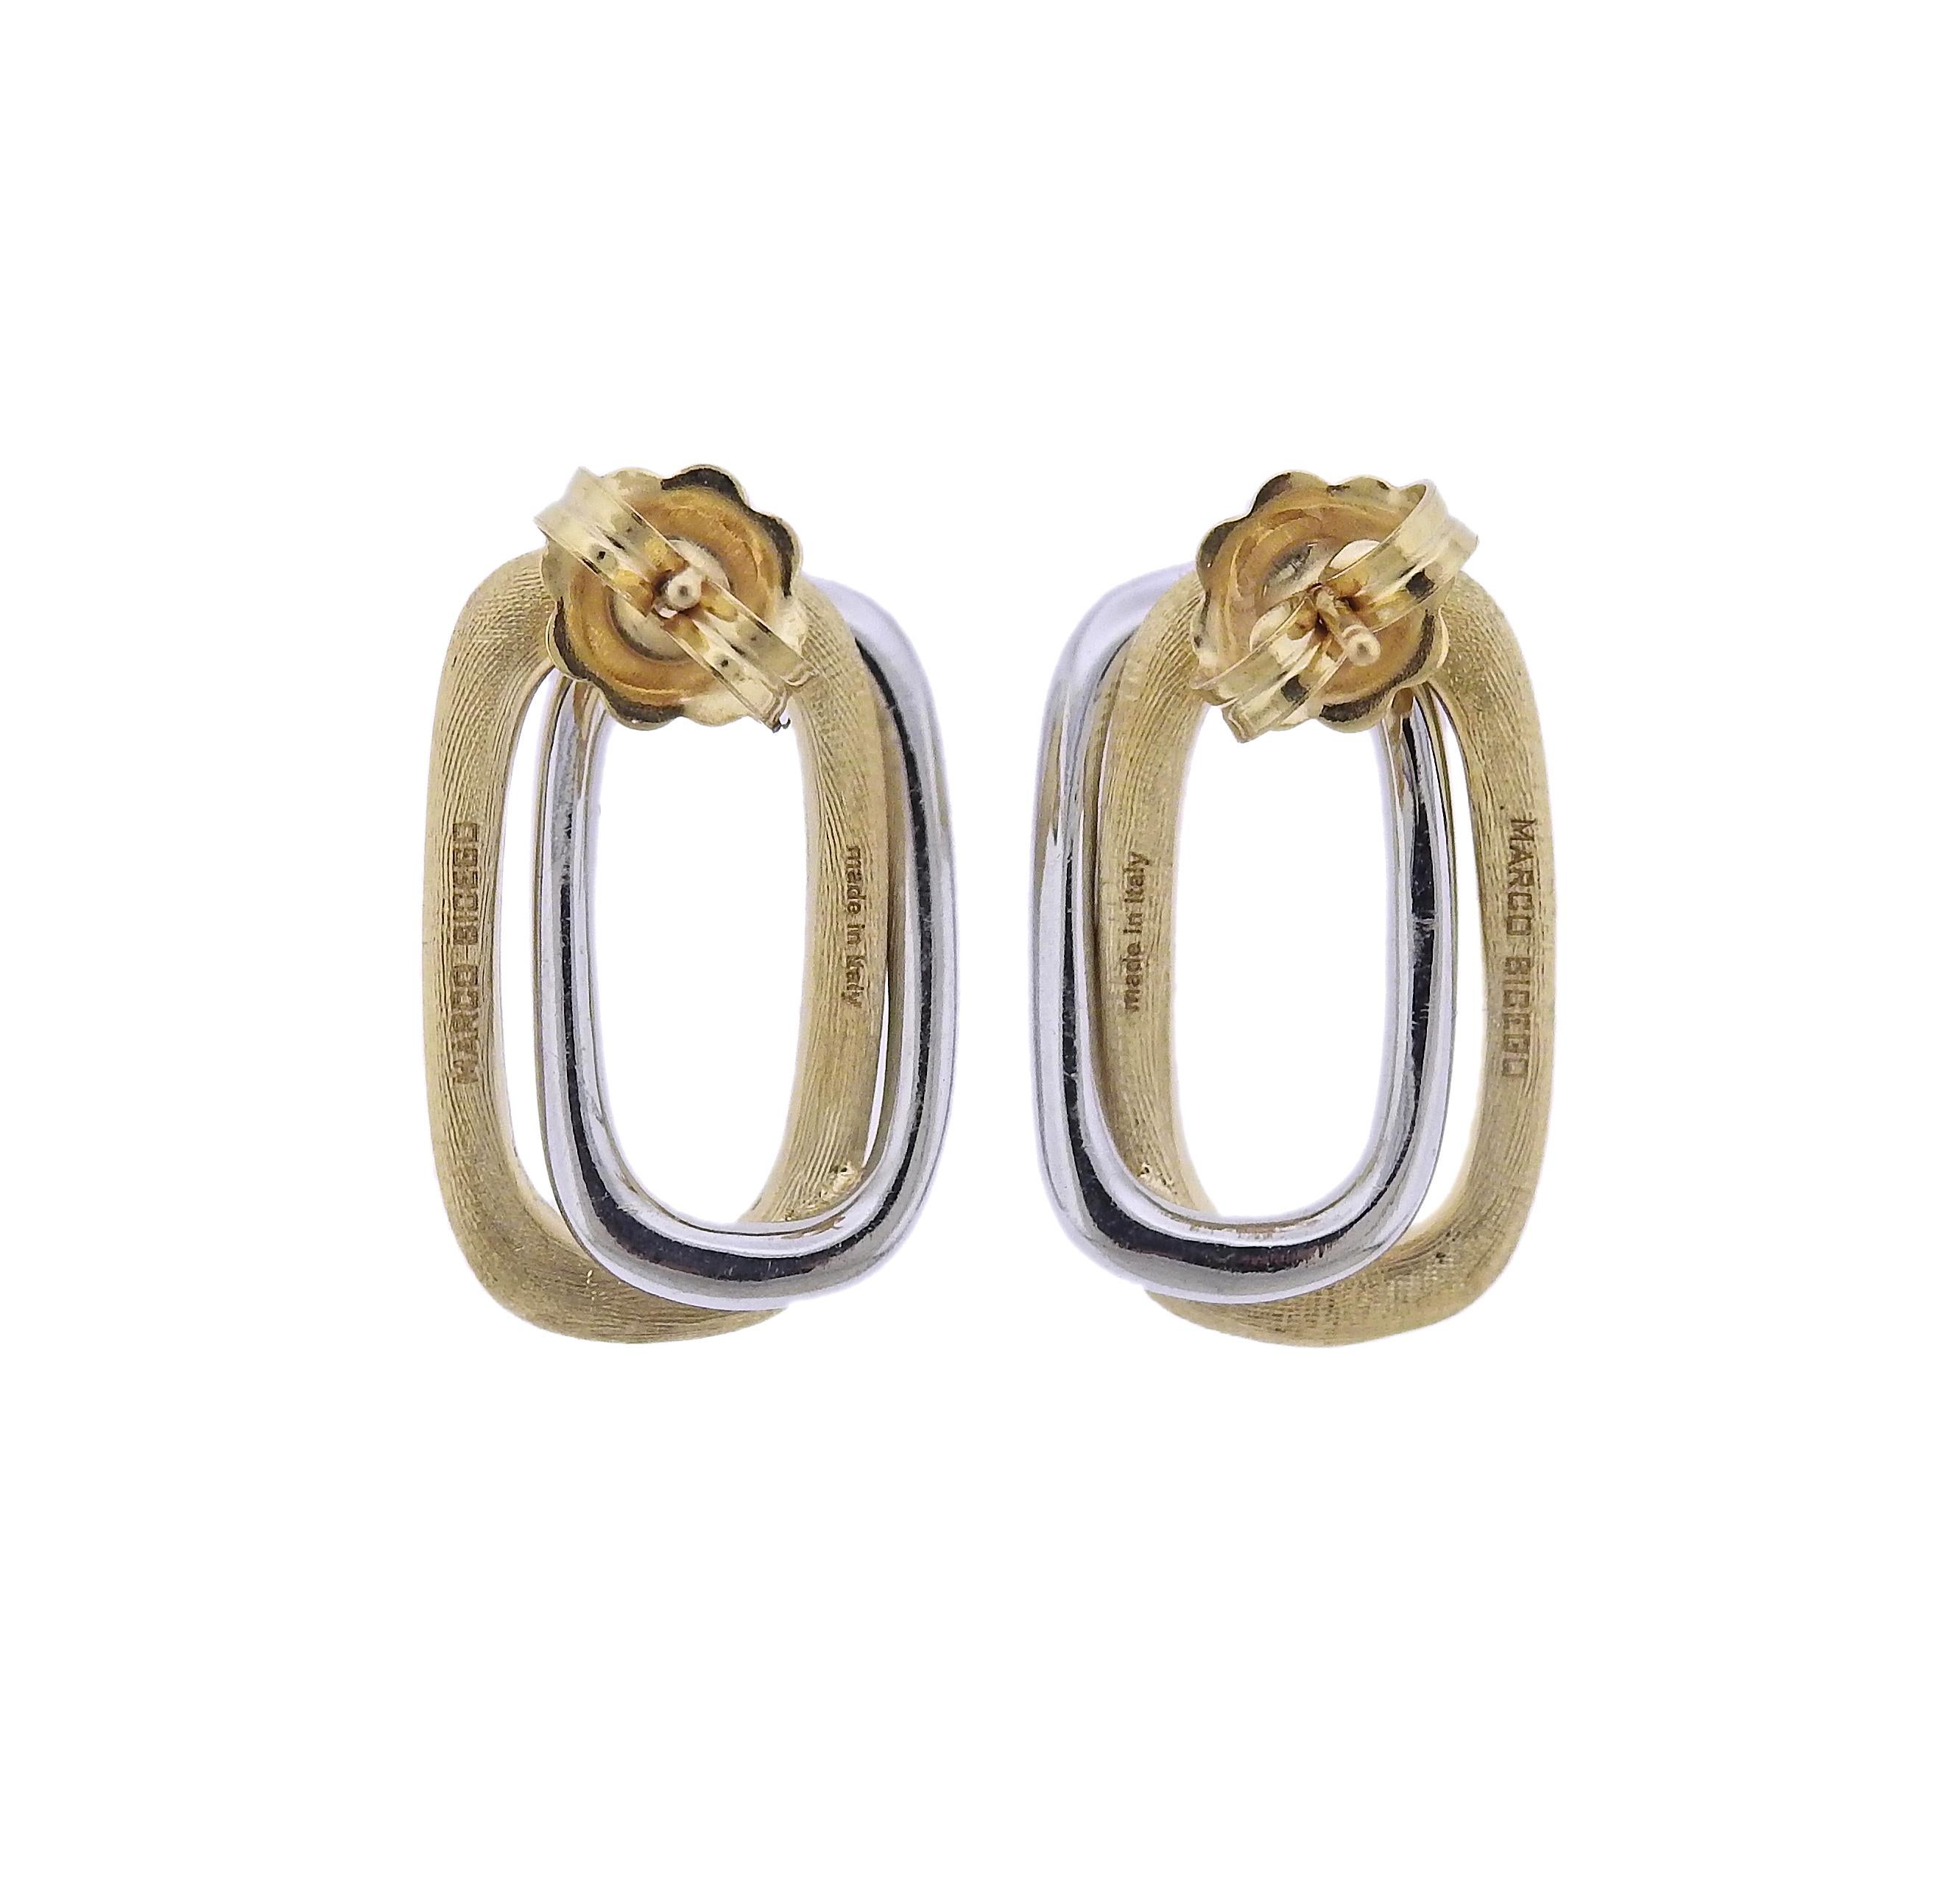 Round Cut MarCo Bicego Murano Gold Diamond Link Stud Earrings For Sale